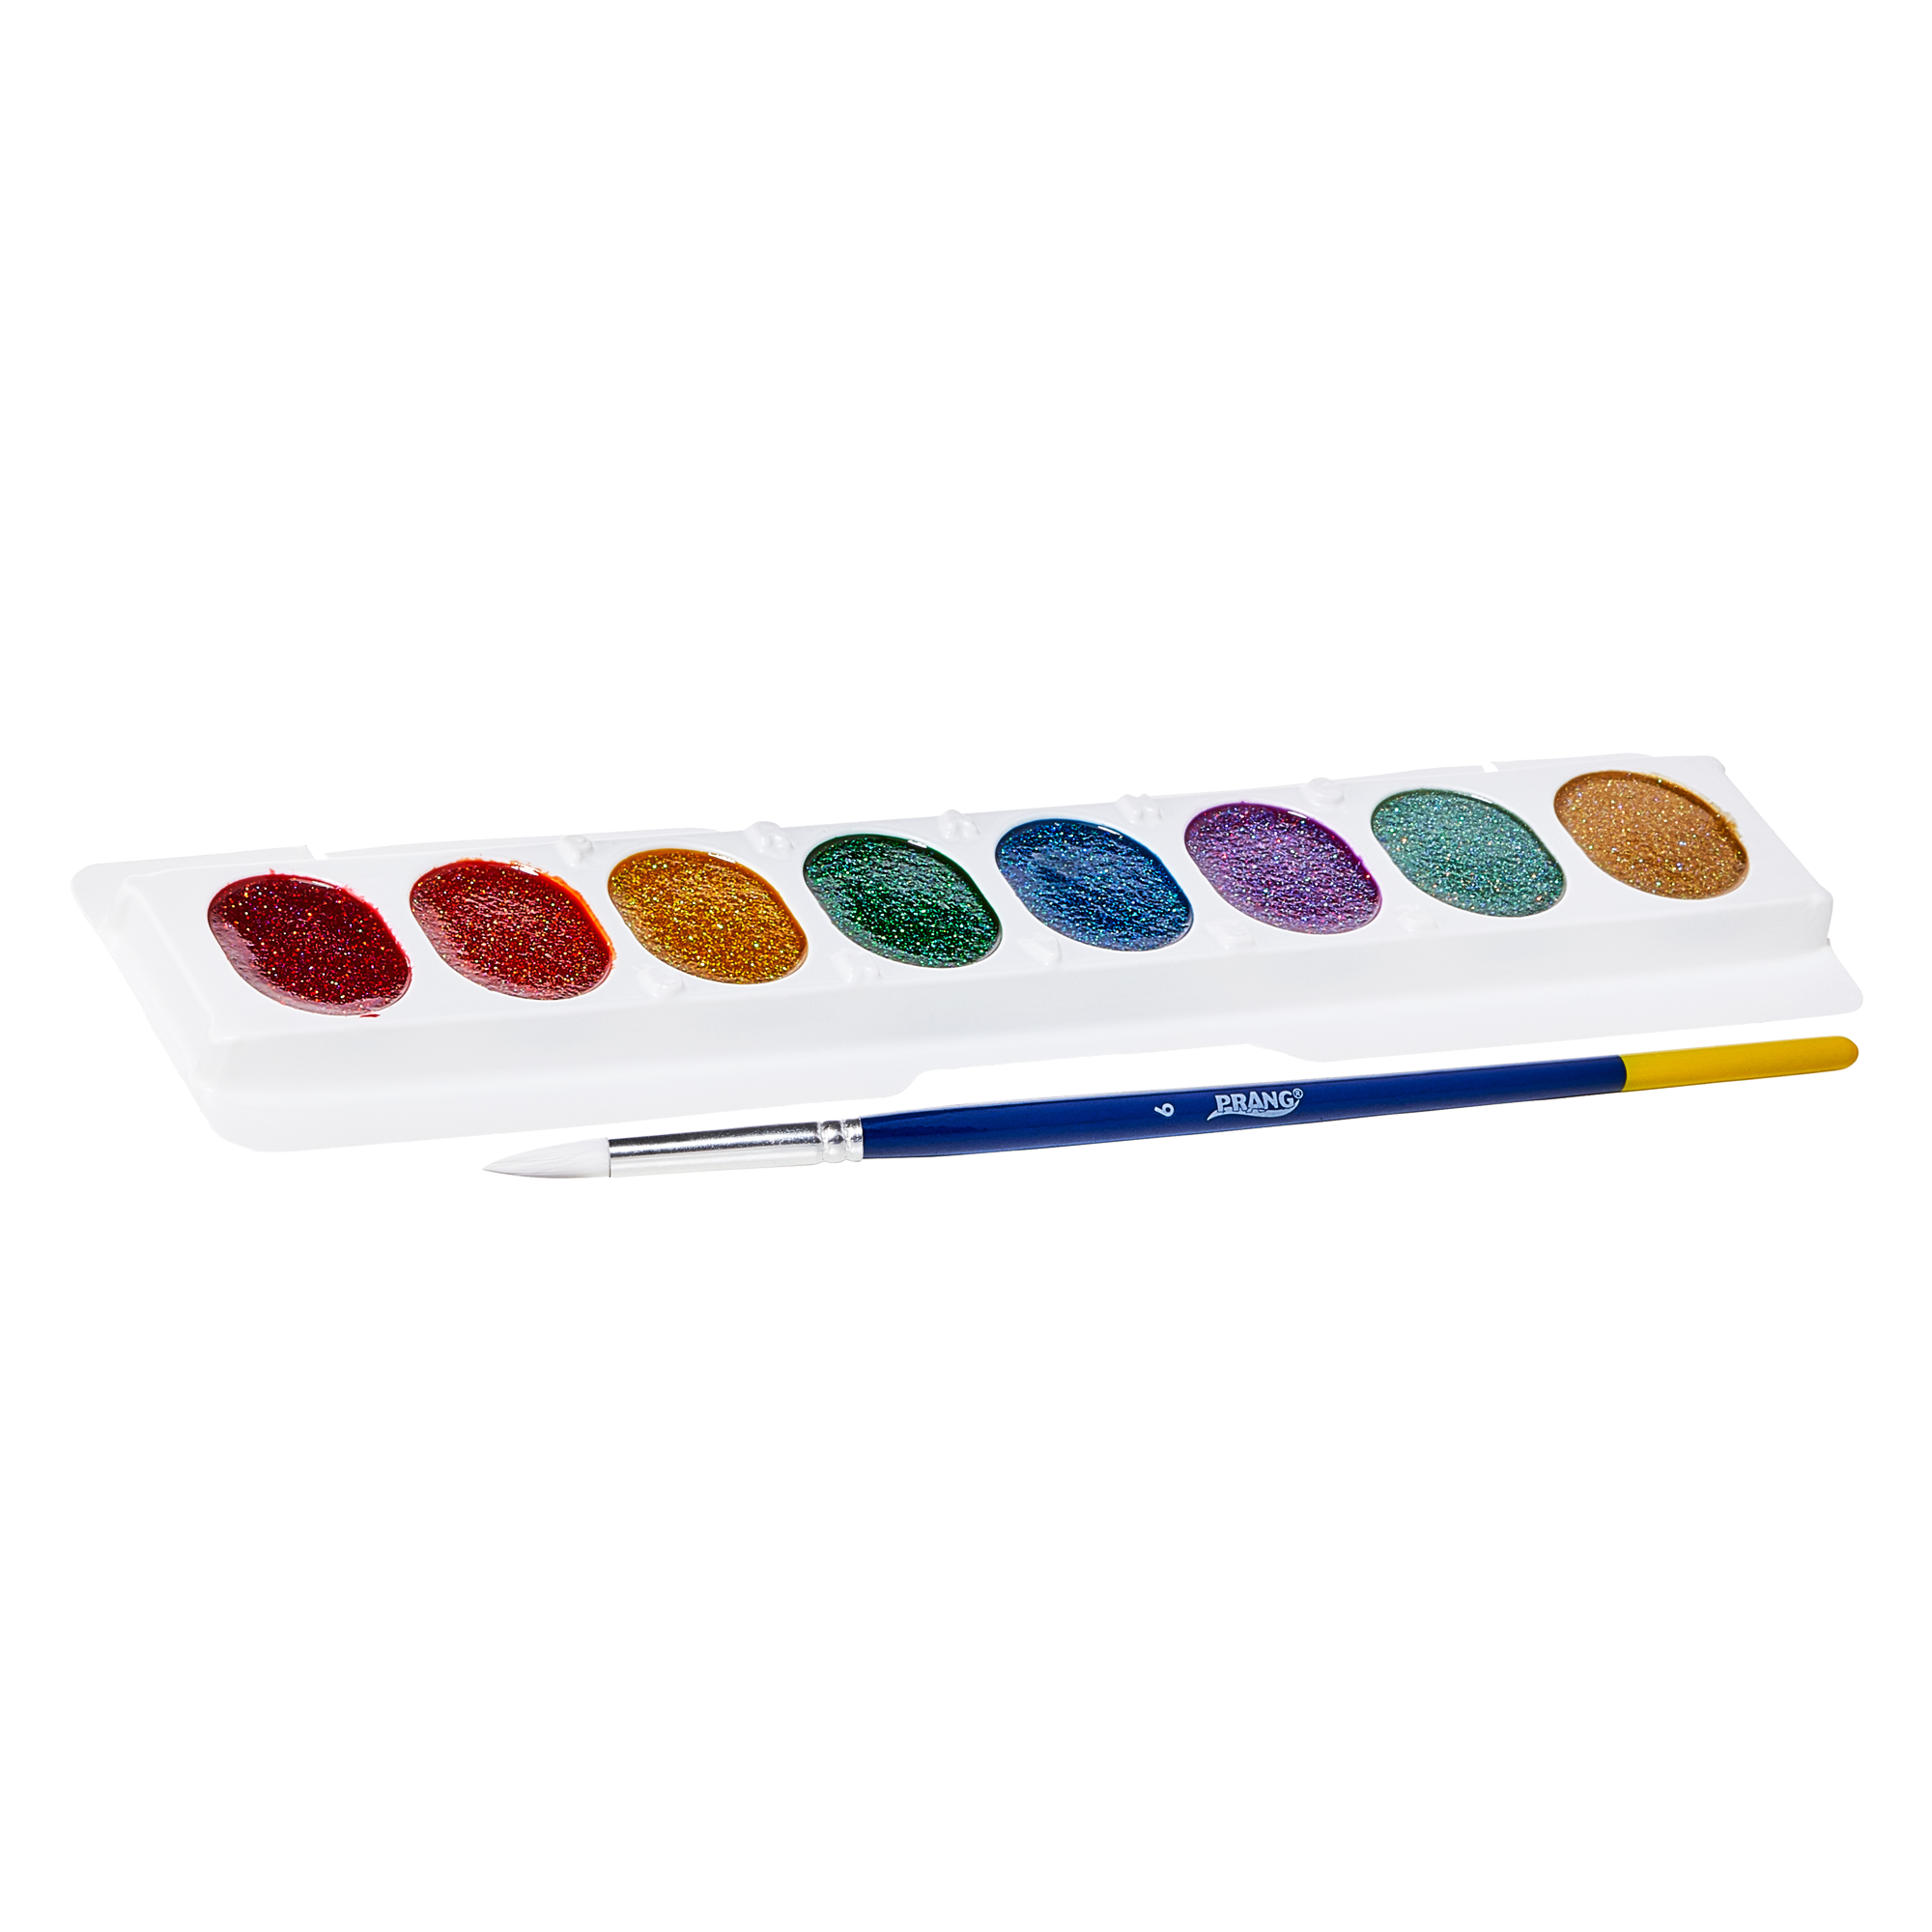  Prang Washable Semi-Moist 16 Classic Colors with 1 brush with  shaped pans provide 41% more paint : Toys & Games